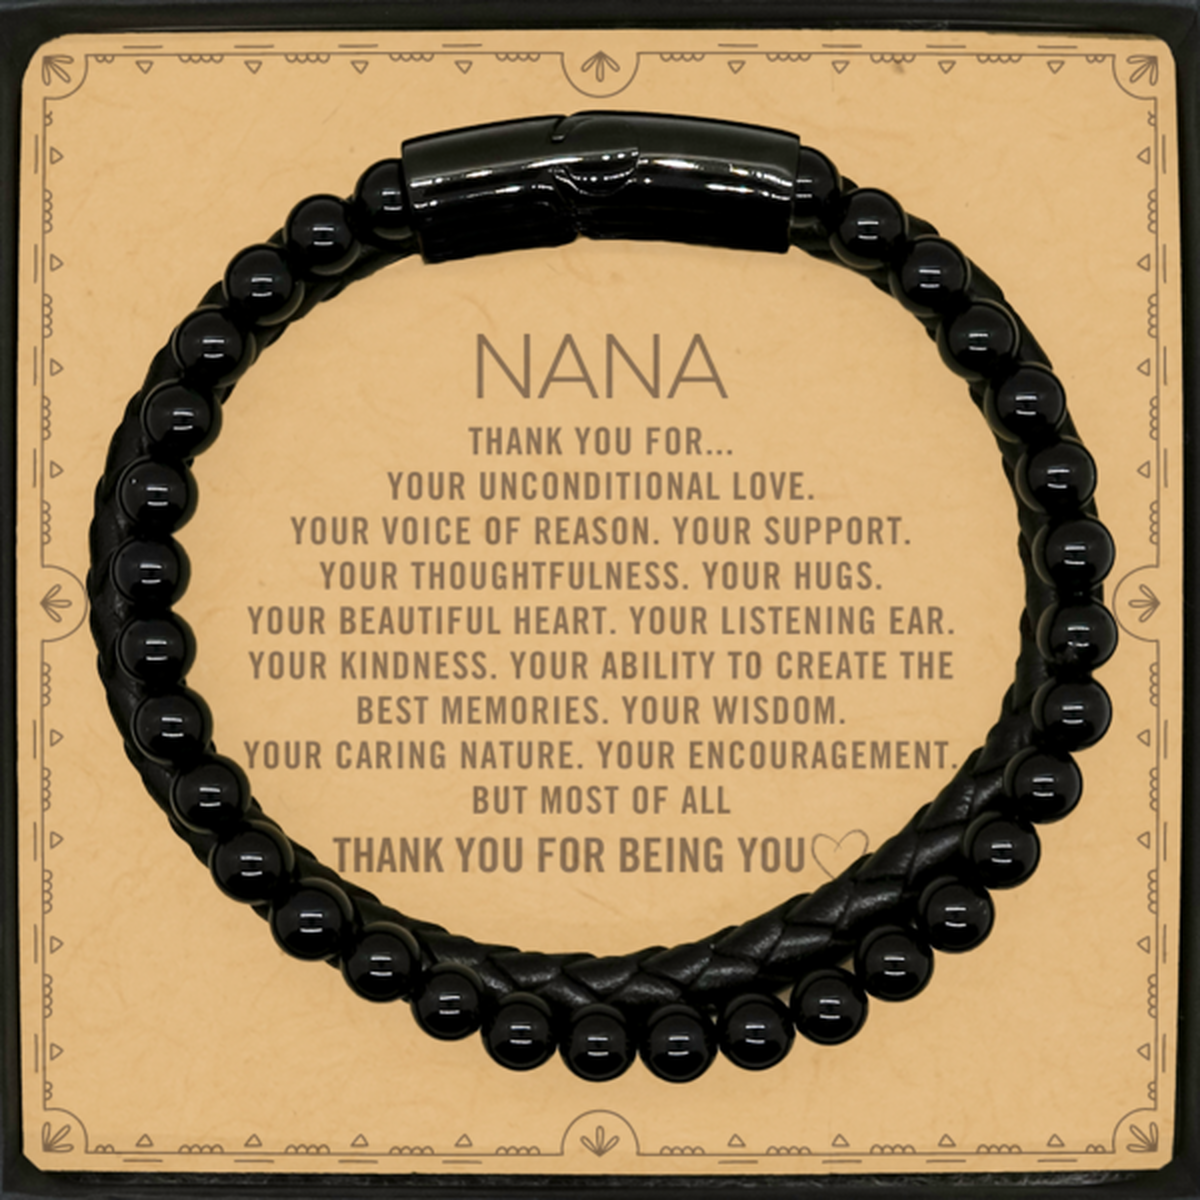 Nana Stone Leather Bracelets Custom, Message Card Gifts For Nana Christmas Graduation Birthday Gifts for Men Women Nana Thank you for Your unconditional love